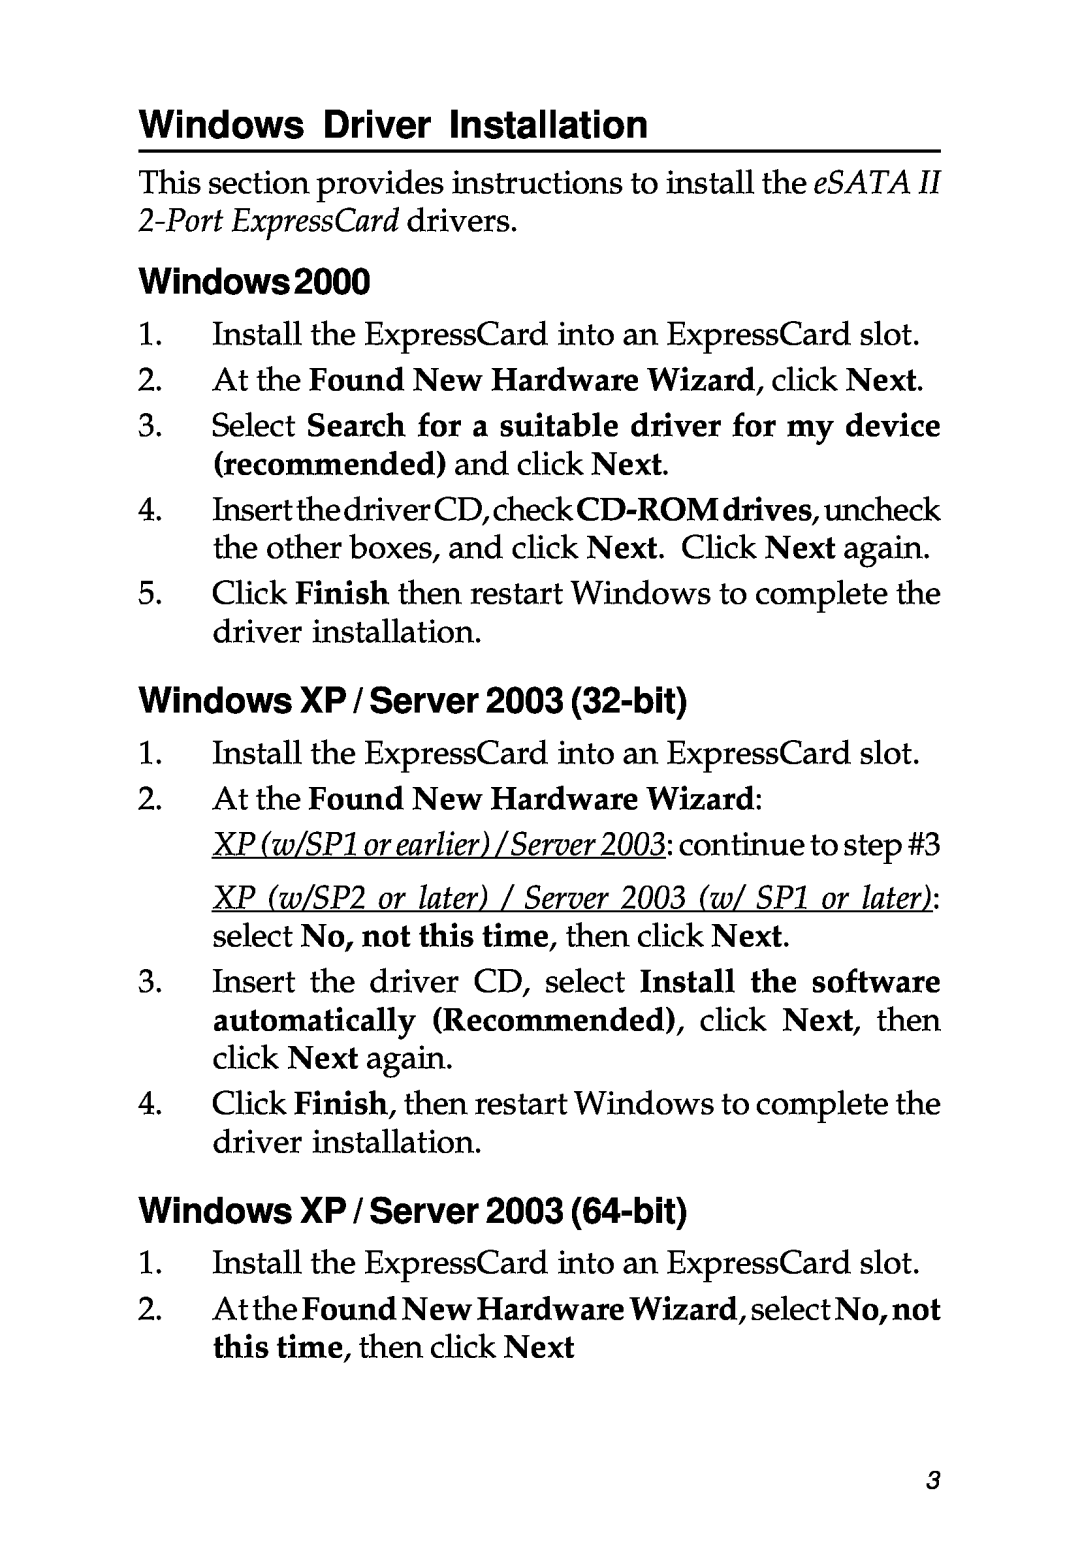 SIIG 104-0487A specifications Windows Driver Installation, Windows XP / Server 2003 32-bit, Windows XP / Server 2003 64-bit 